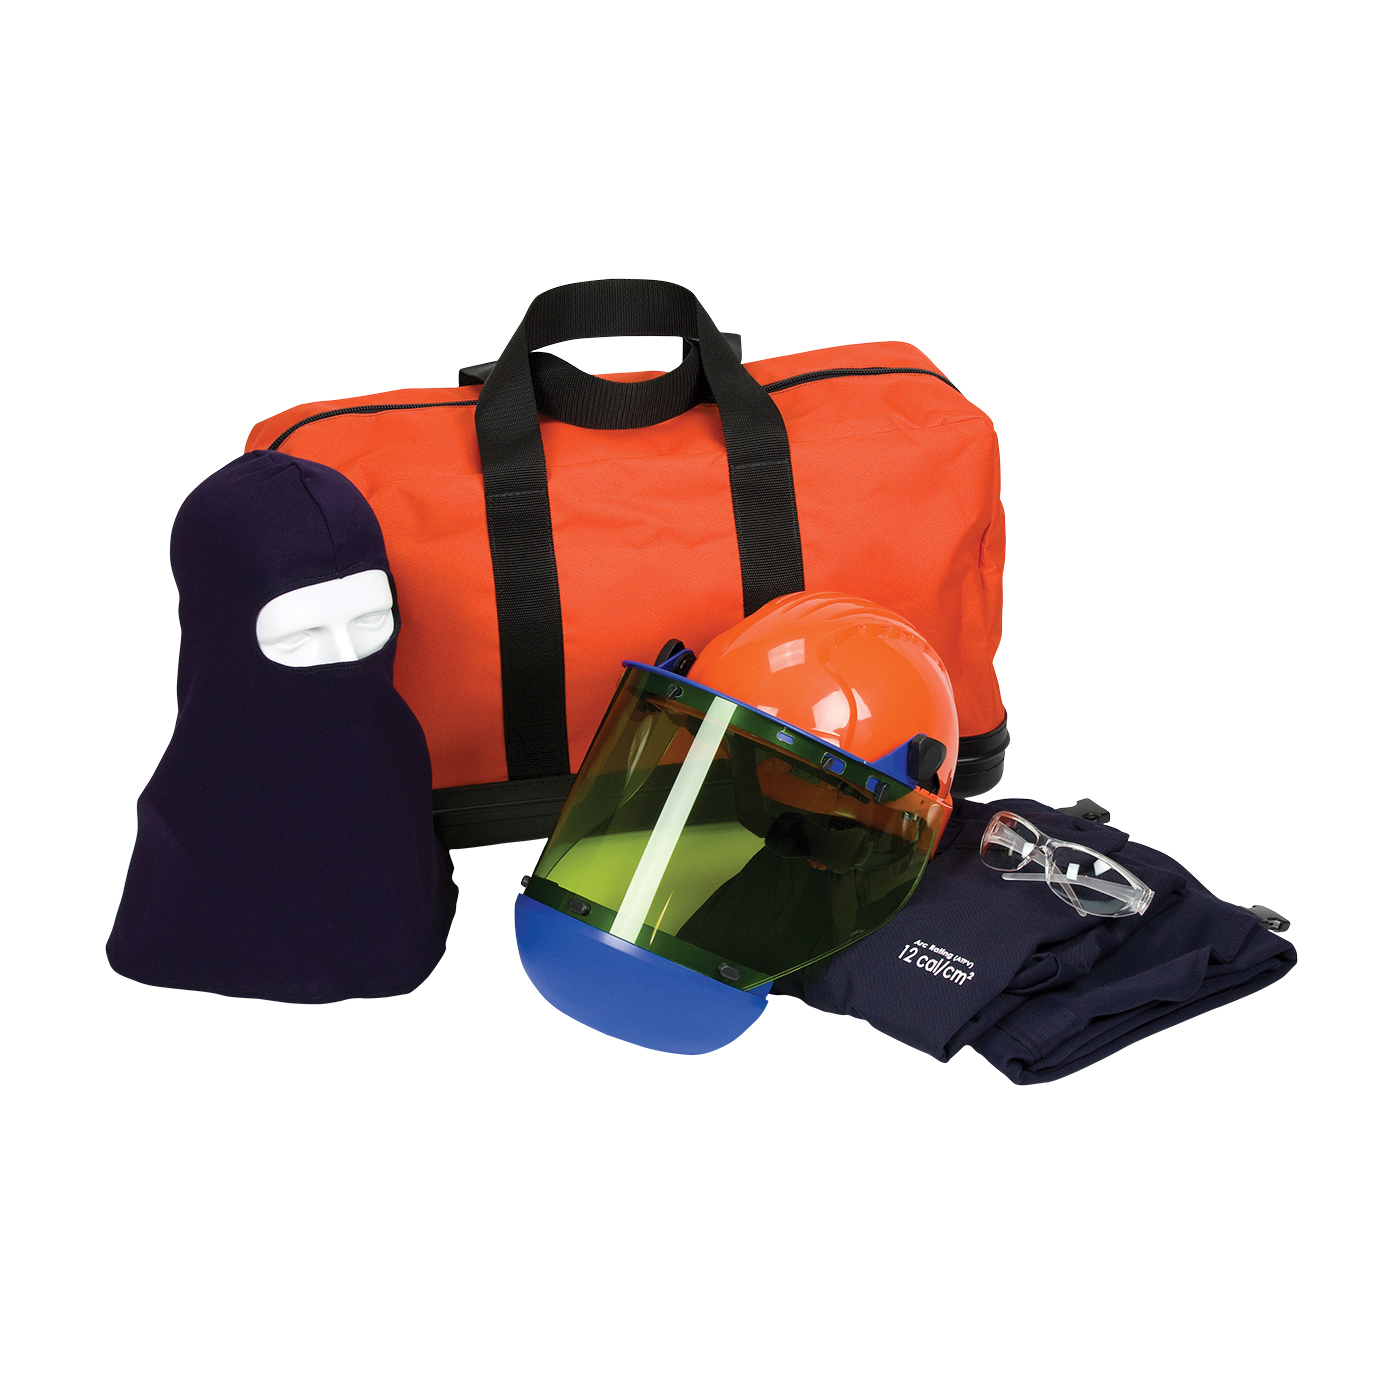 PIP® 9150-52810/3X Arc Flash Kit, Hazard Risk Category (HRC): 2, Hood/Face Shield Max Arc Flash Protection: 12 cal/sq-cm, Garment Max Arc Flash Protection: 12 cal/sq-cm, Specifications Met: NFPA 70E-2018, Arc Shield/Hard Hat Head/Face Protection